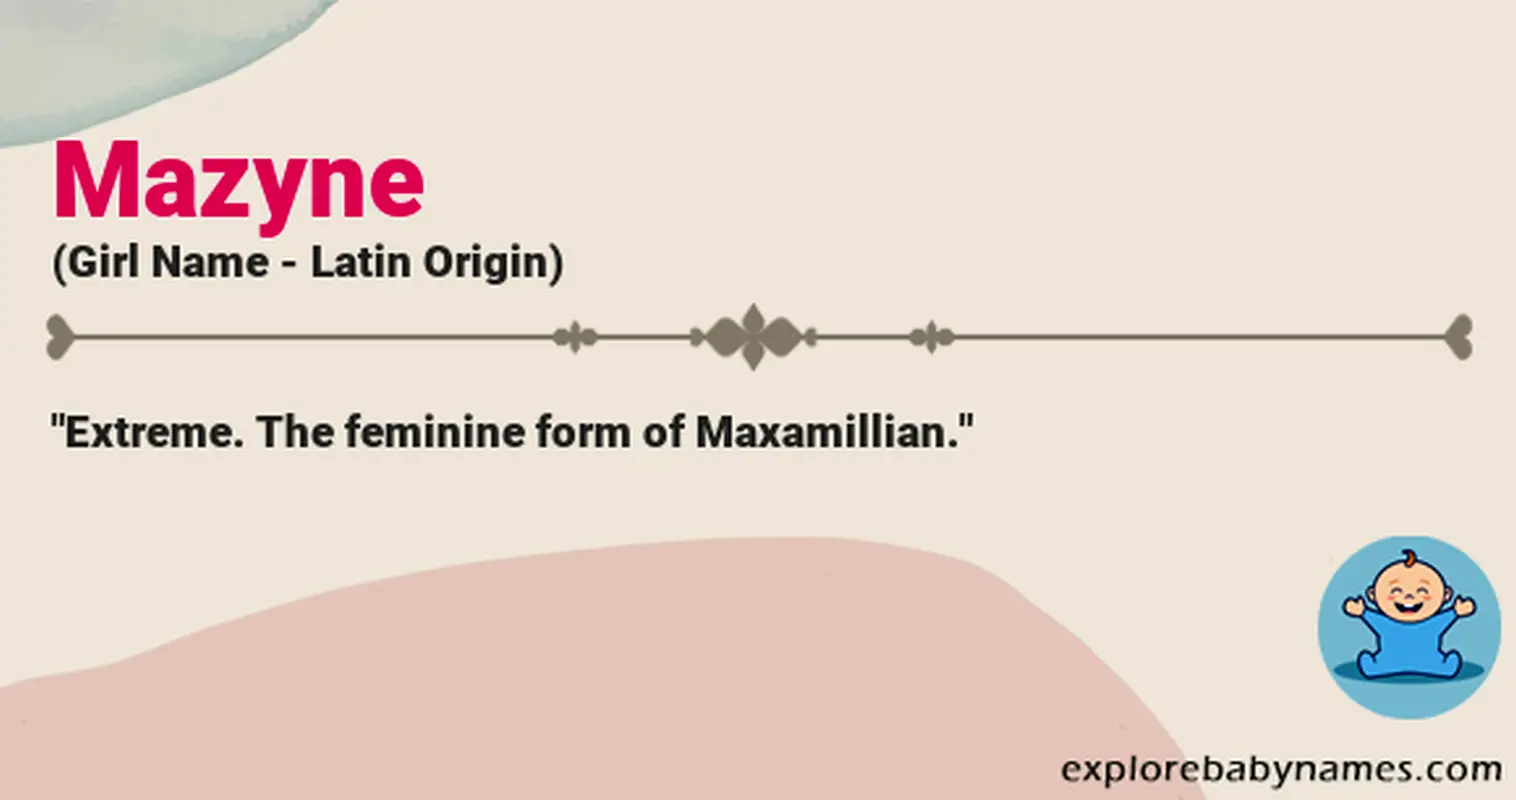 Meaning of Mazyne